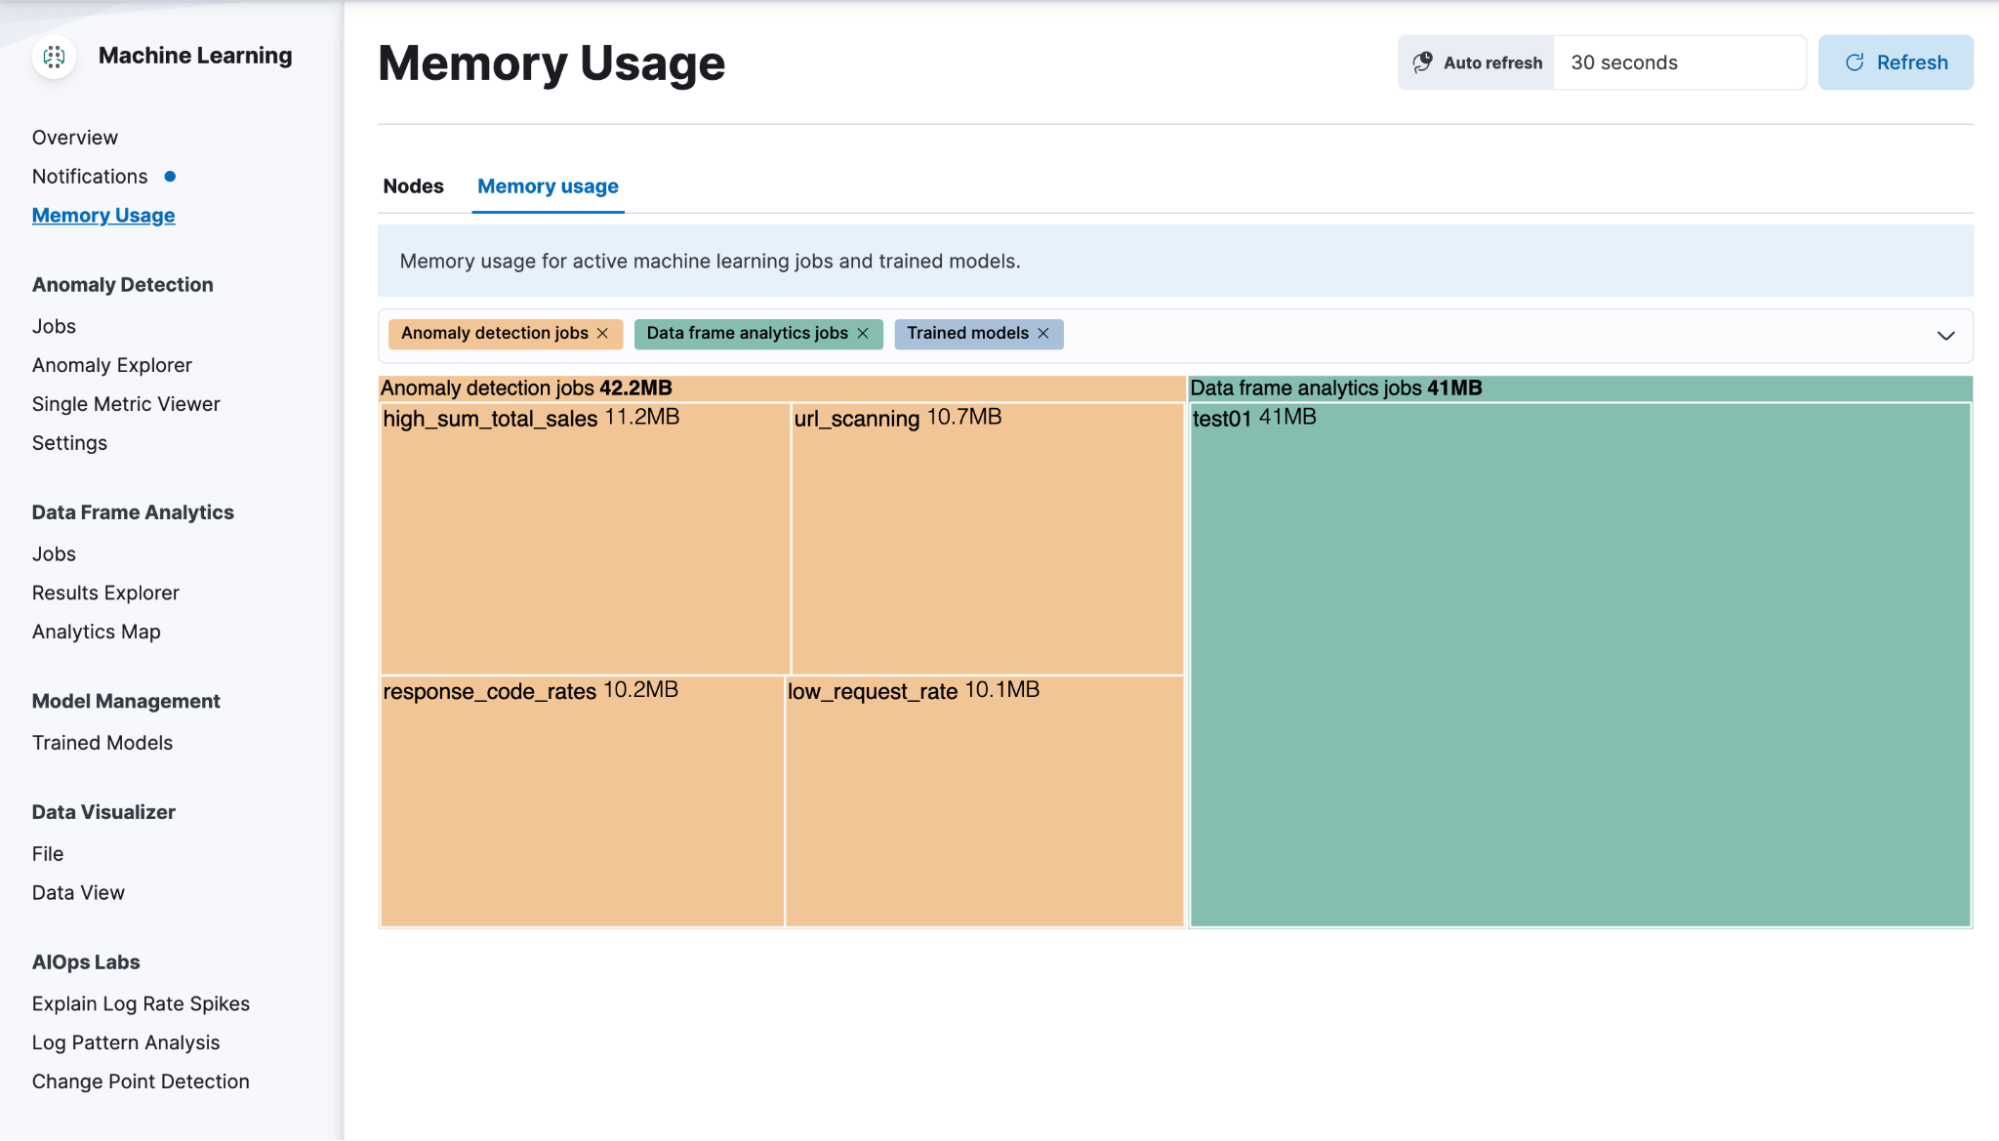 New view for memory usage by machine learning jobs